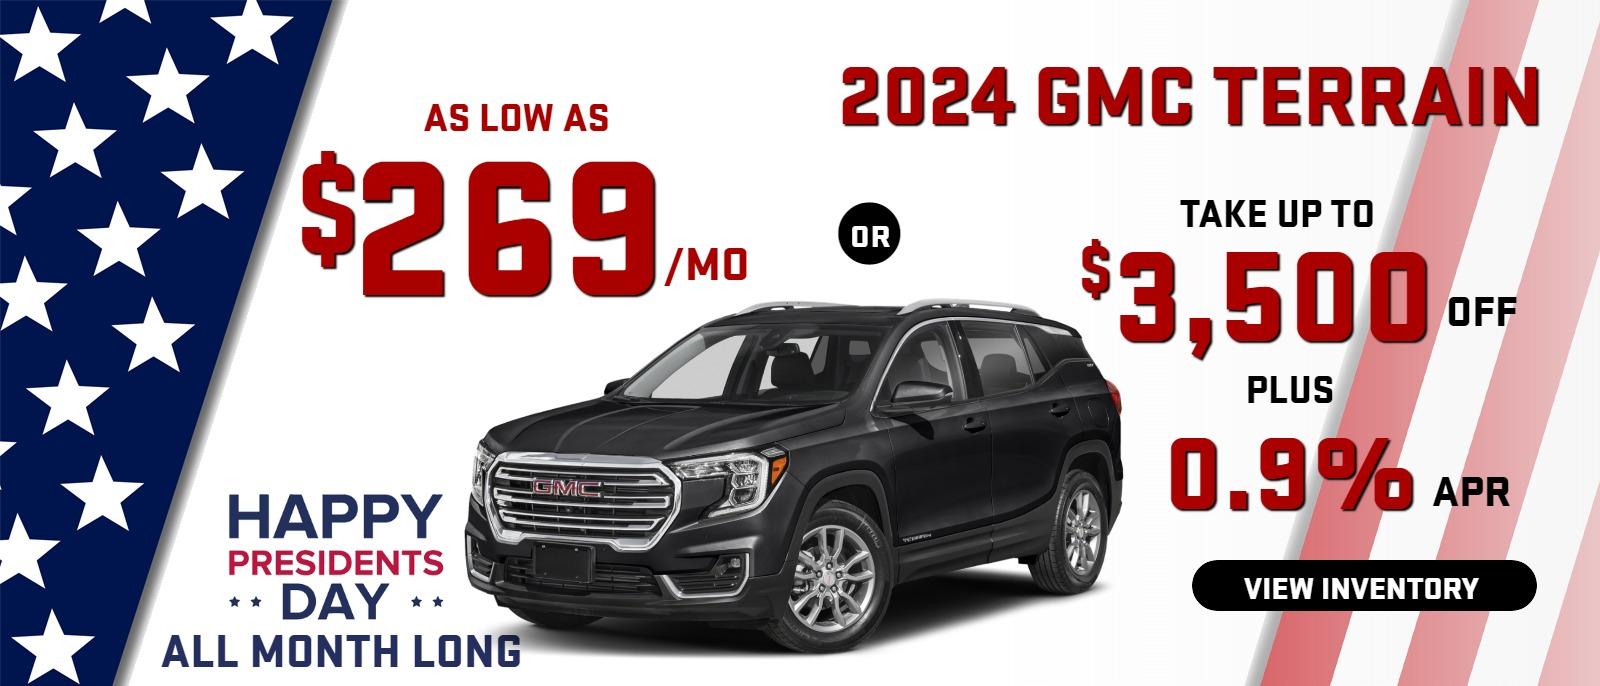 2024 Terrain
stock G2966
take up to $3500 OFF 
OR 
AS LOW AS
$ 269/MO
& 0.9% FINANCE